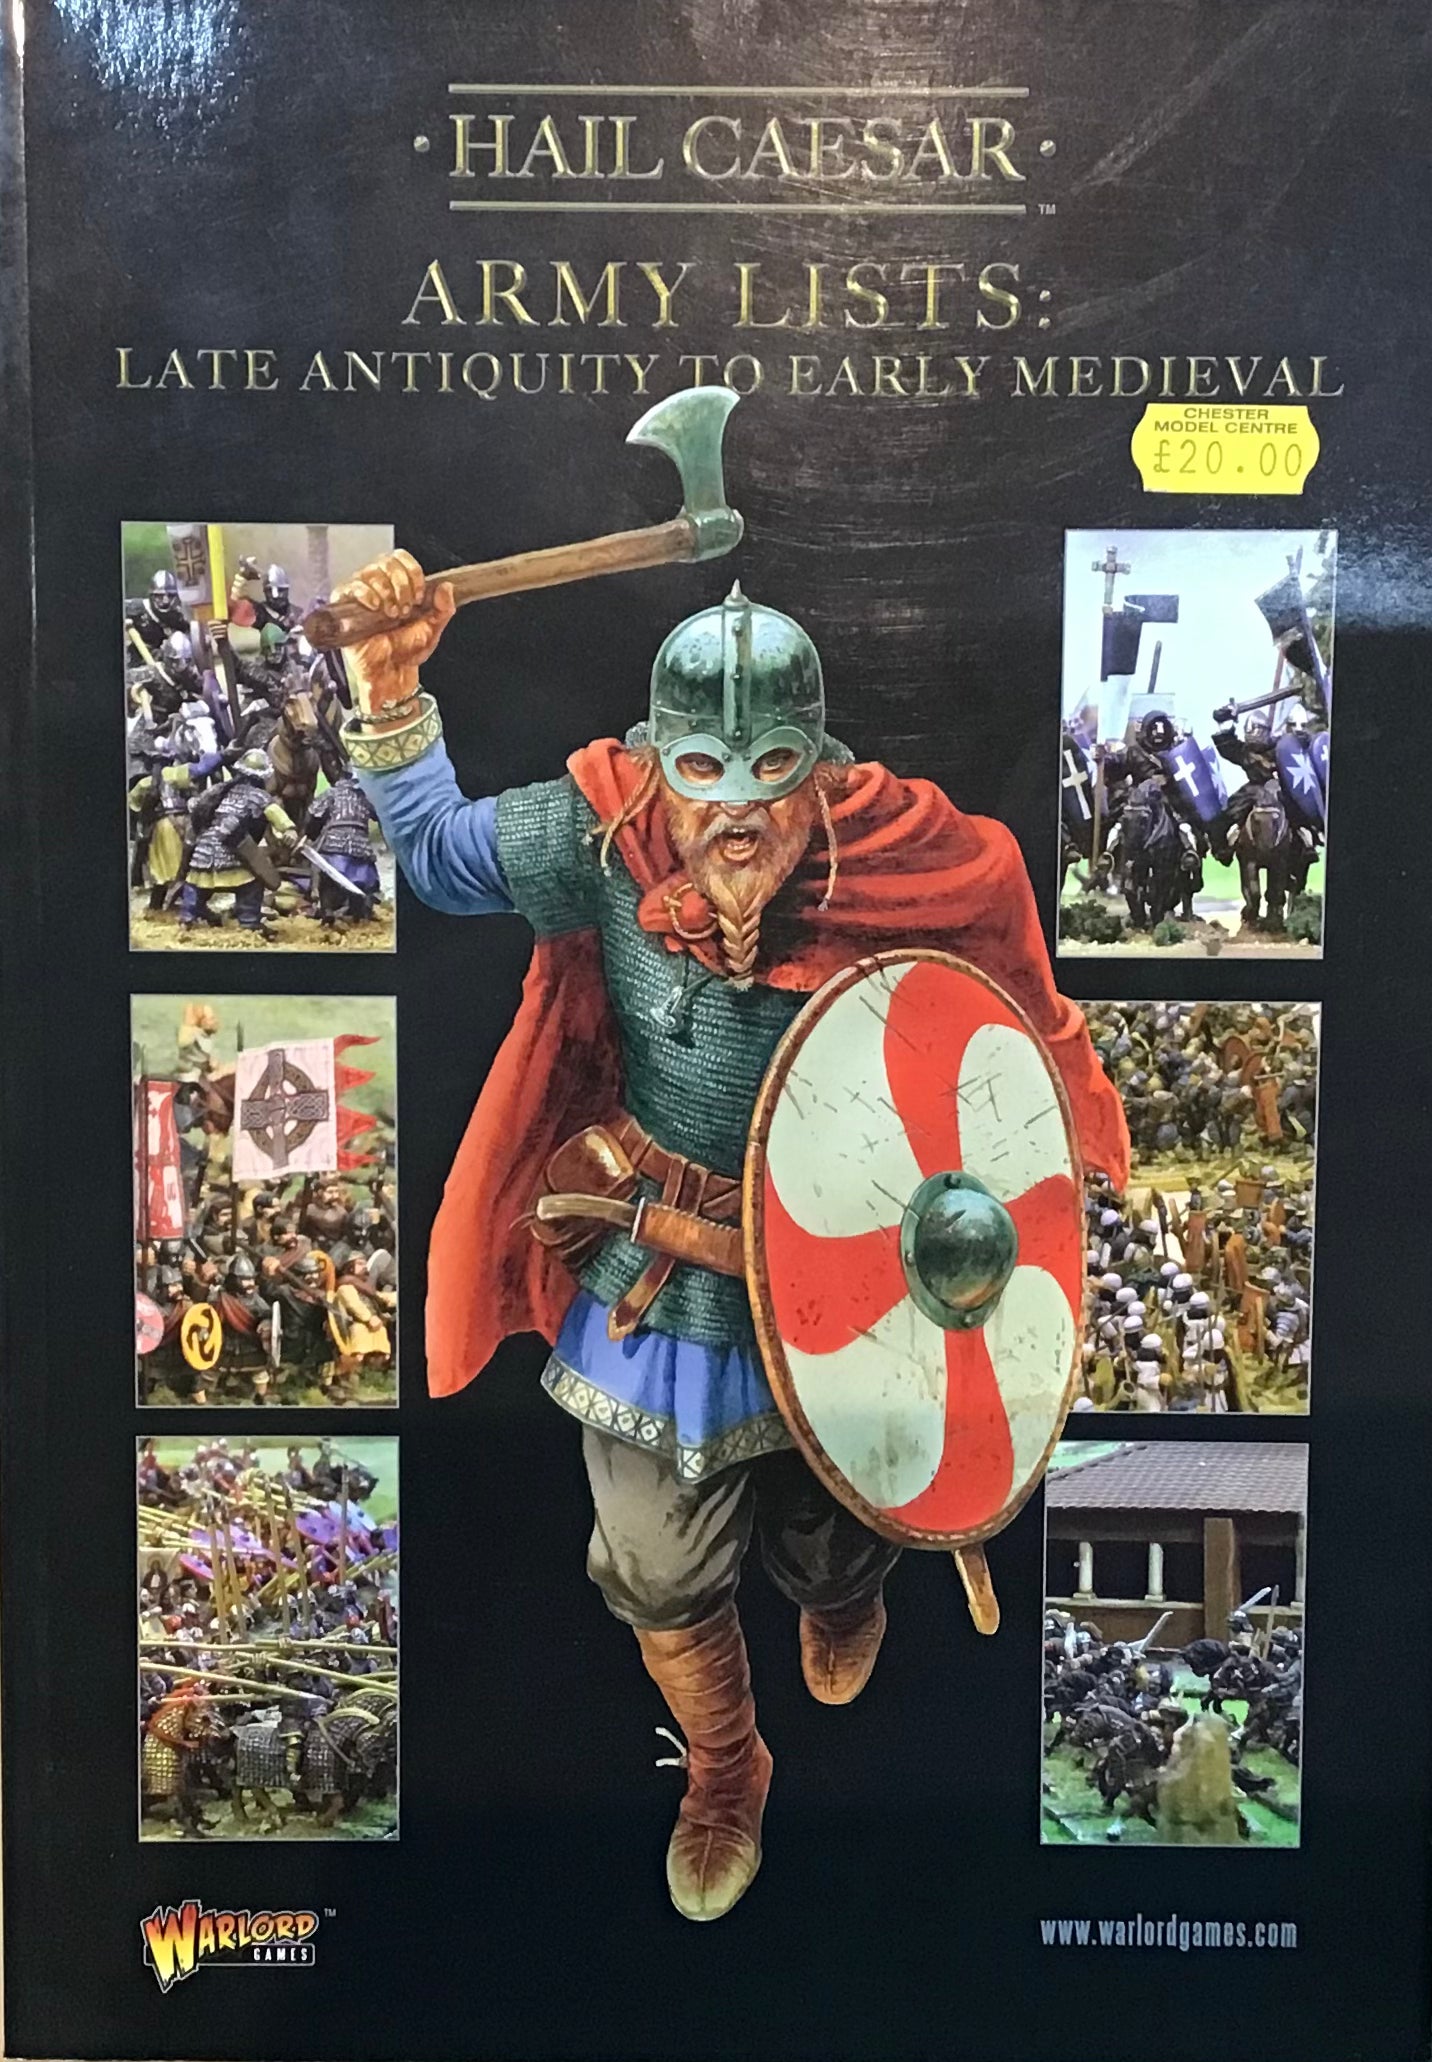 Hail Caesar Army Lists Late Antiquity to Early Medieval by Warlord Games - Chester Model Centre